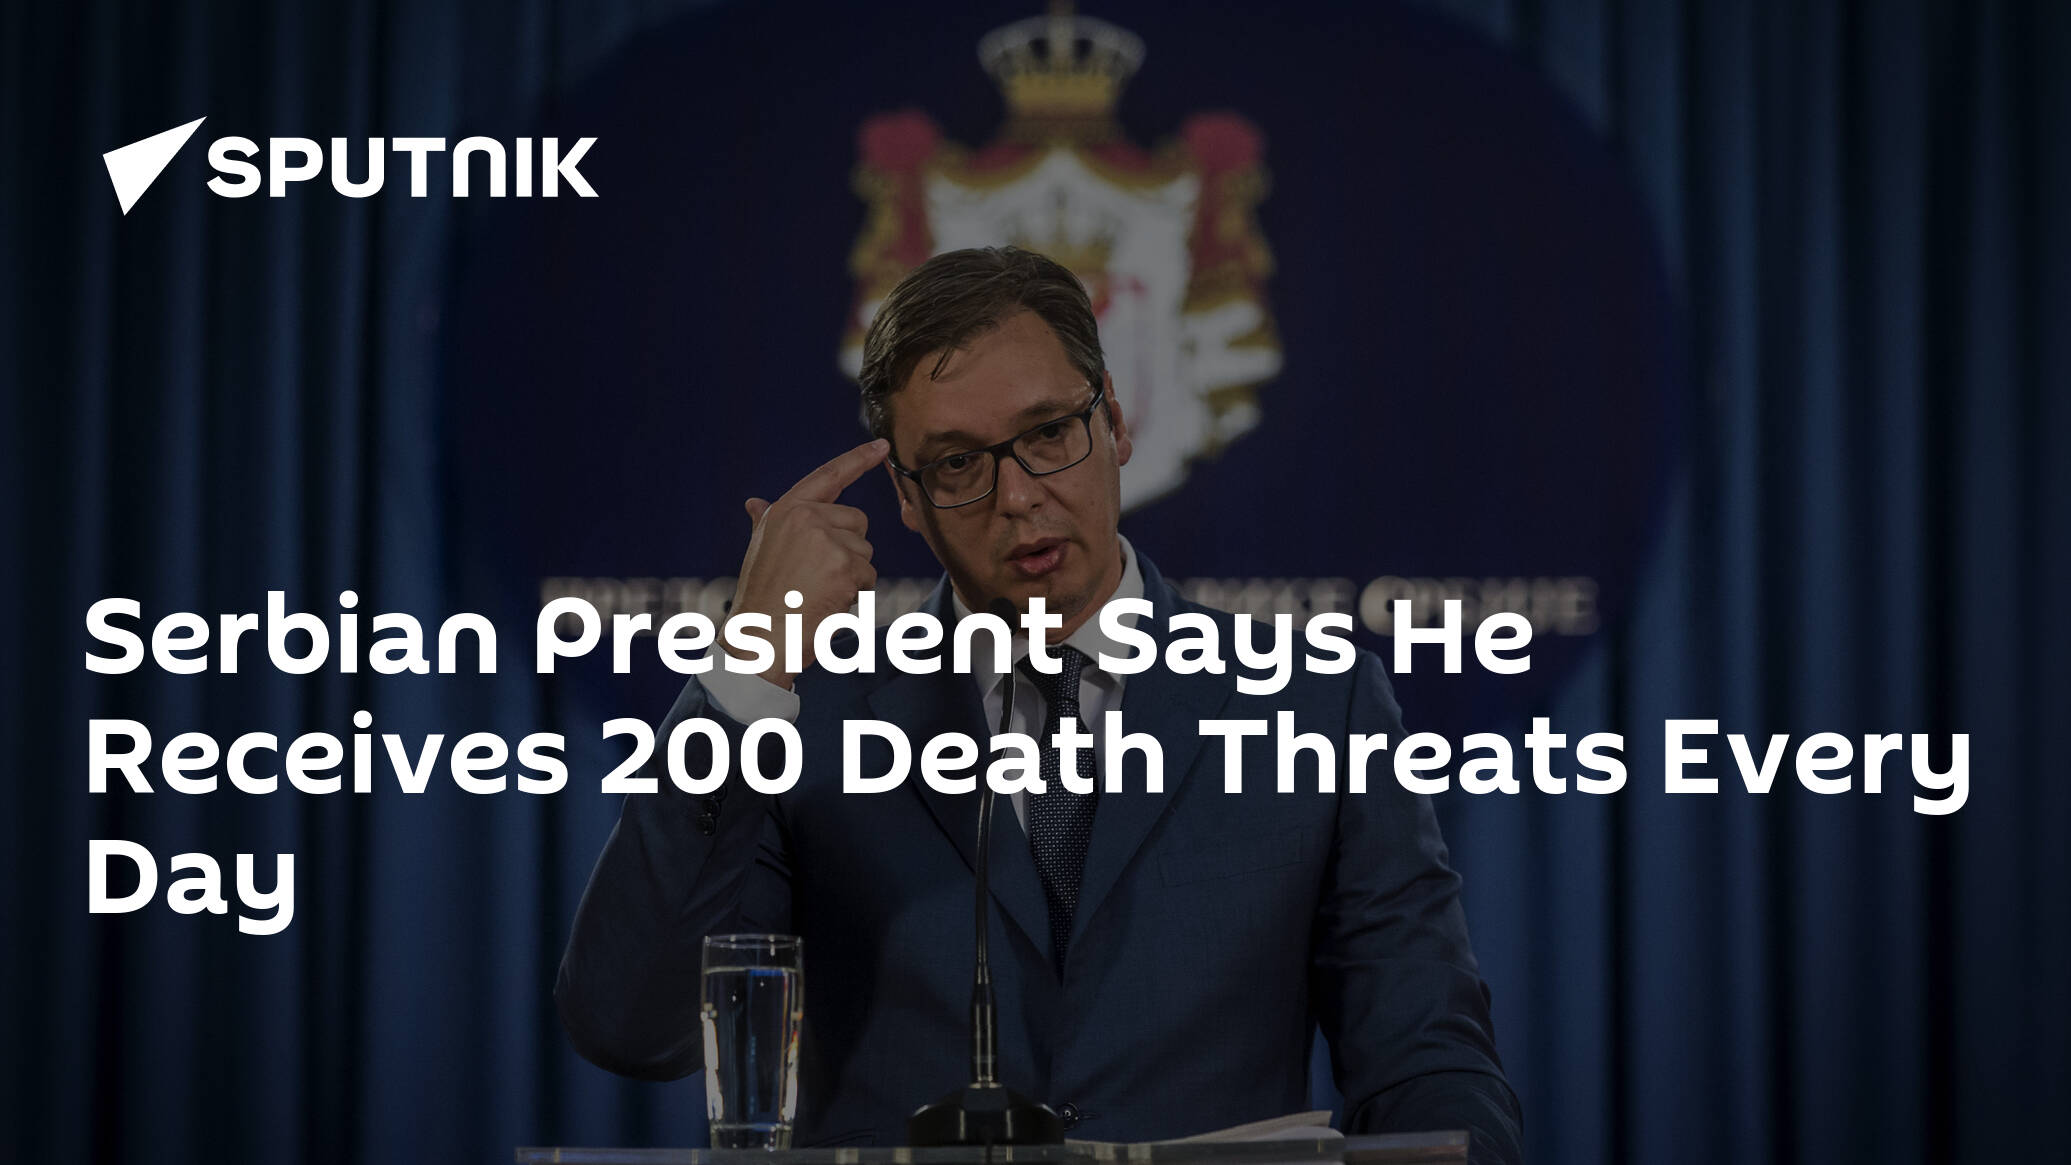 Serbian President Says He Receives 200 Death Threats Every Day